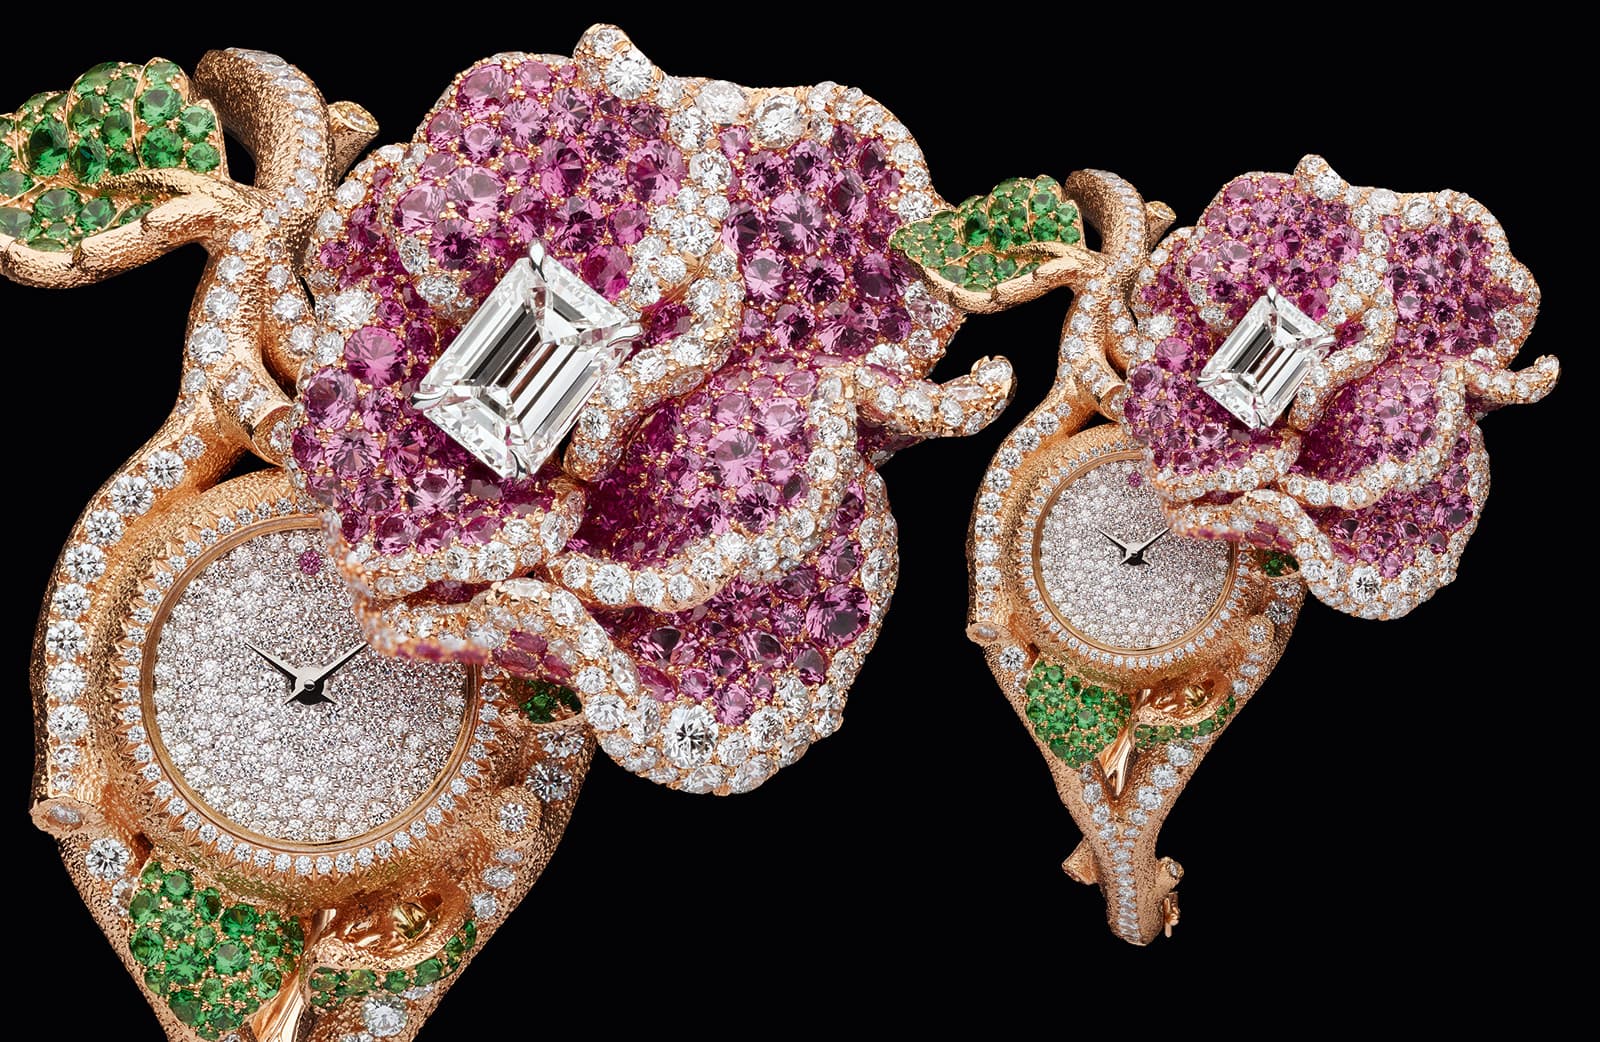 RoseDior High Jewellery timepiece in pink and white gold, with 2.20 cts emerald cut diamond, diamonds, pink sapphires and tsavorite garnets